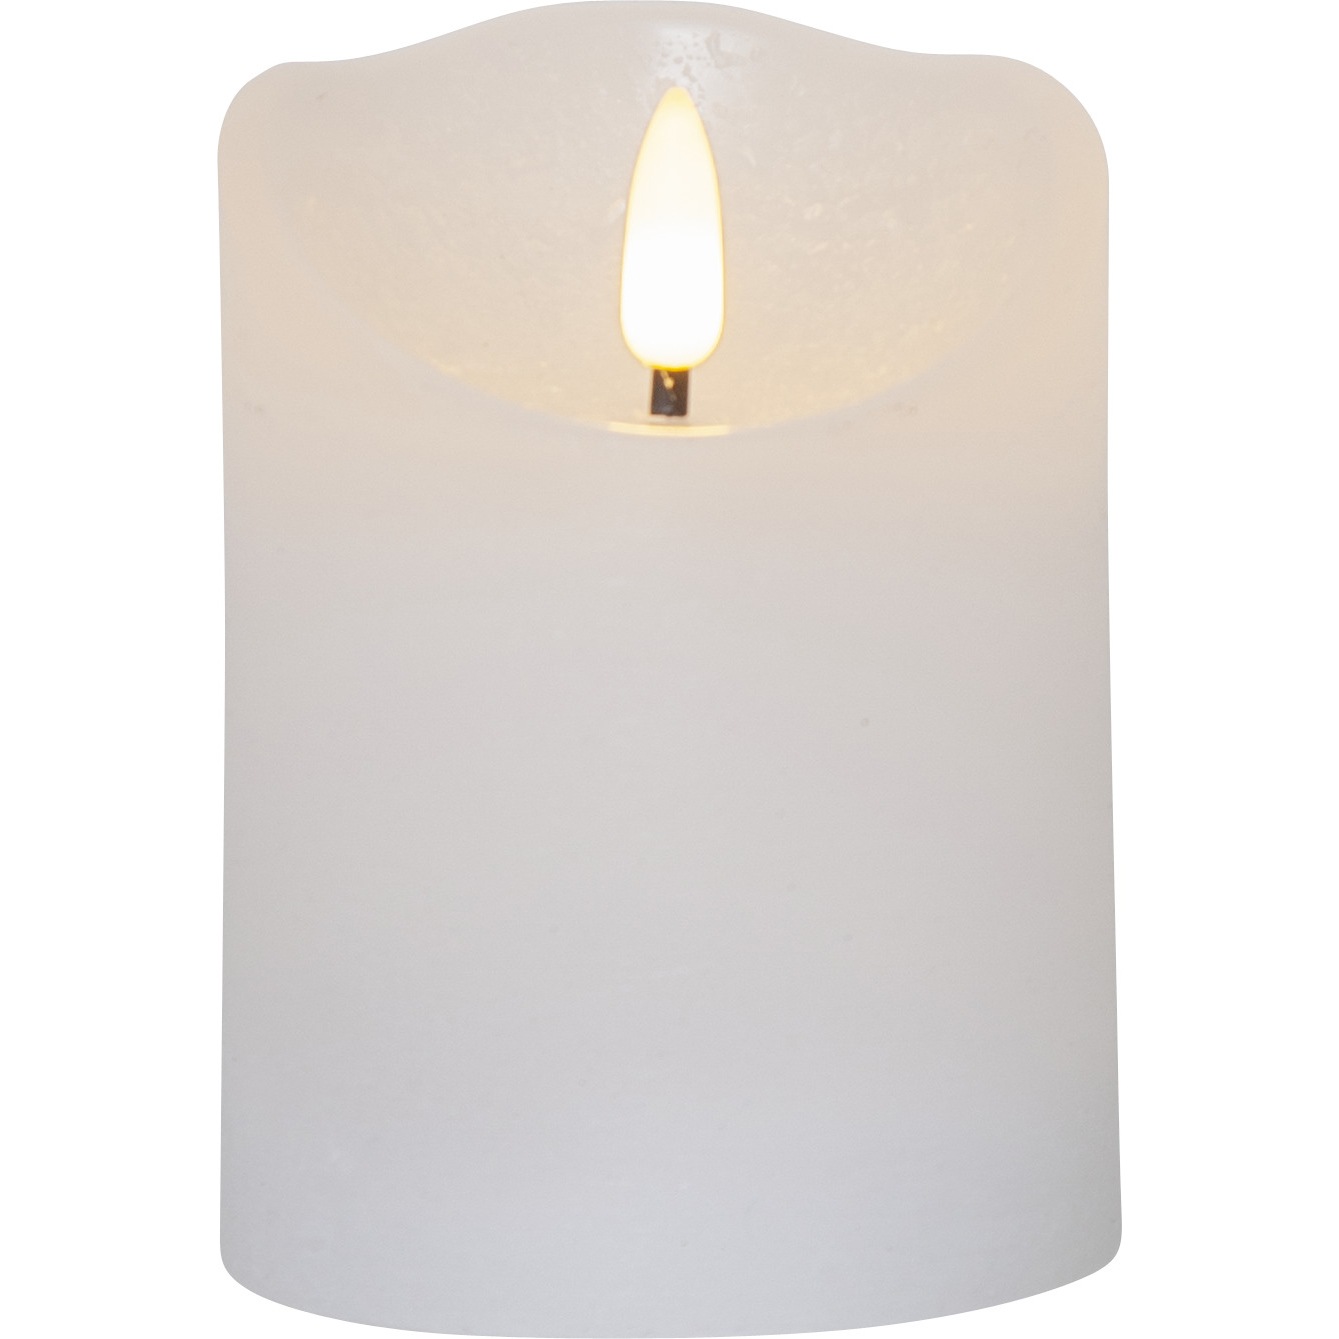 Flamme Rustic LED Pillar Candle White, 10 cm